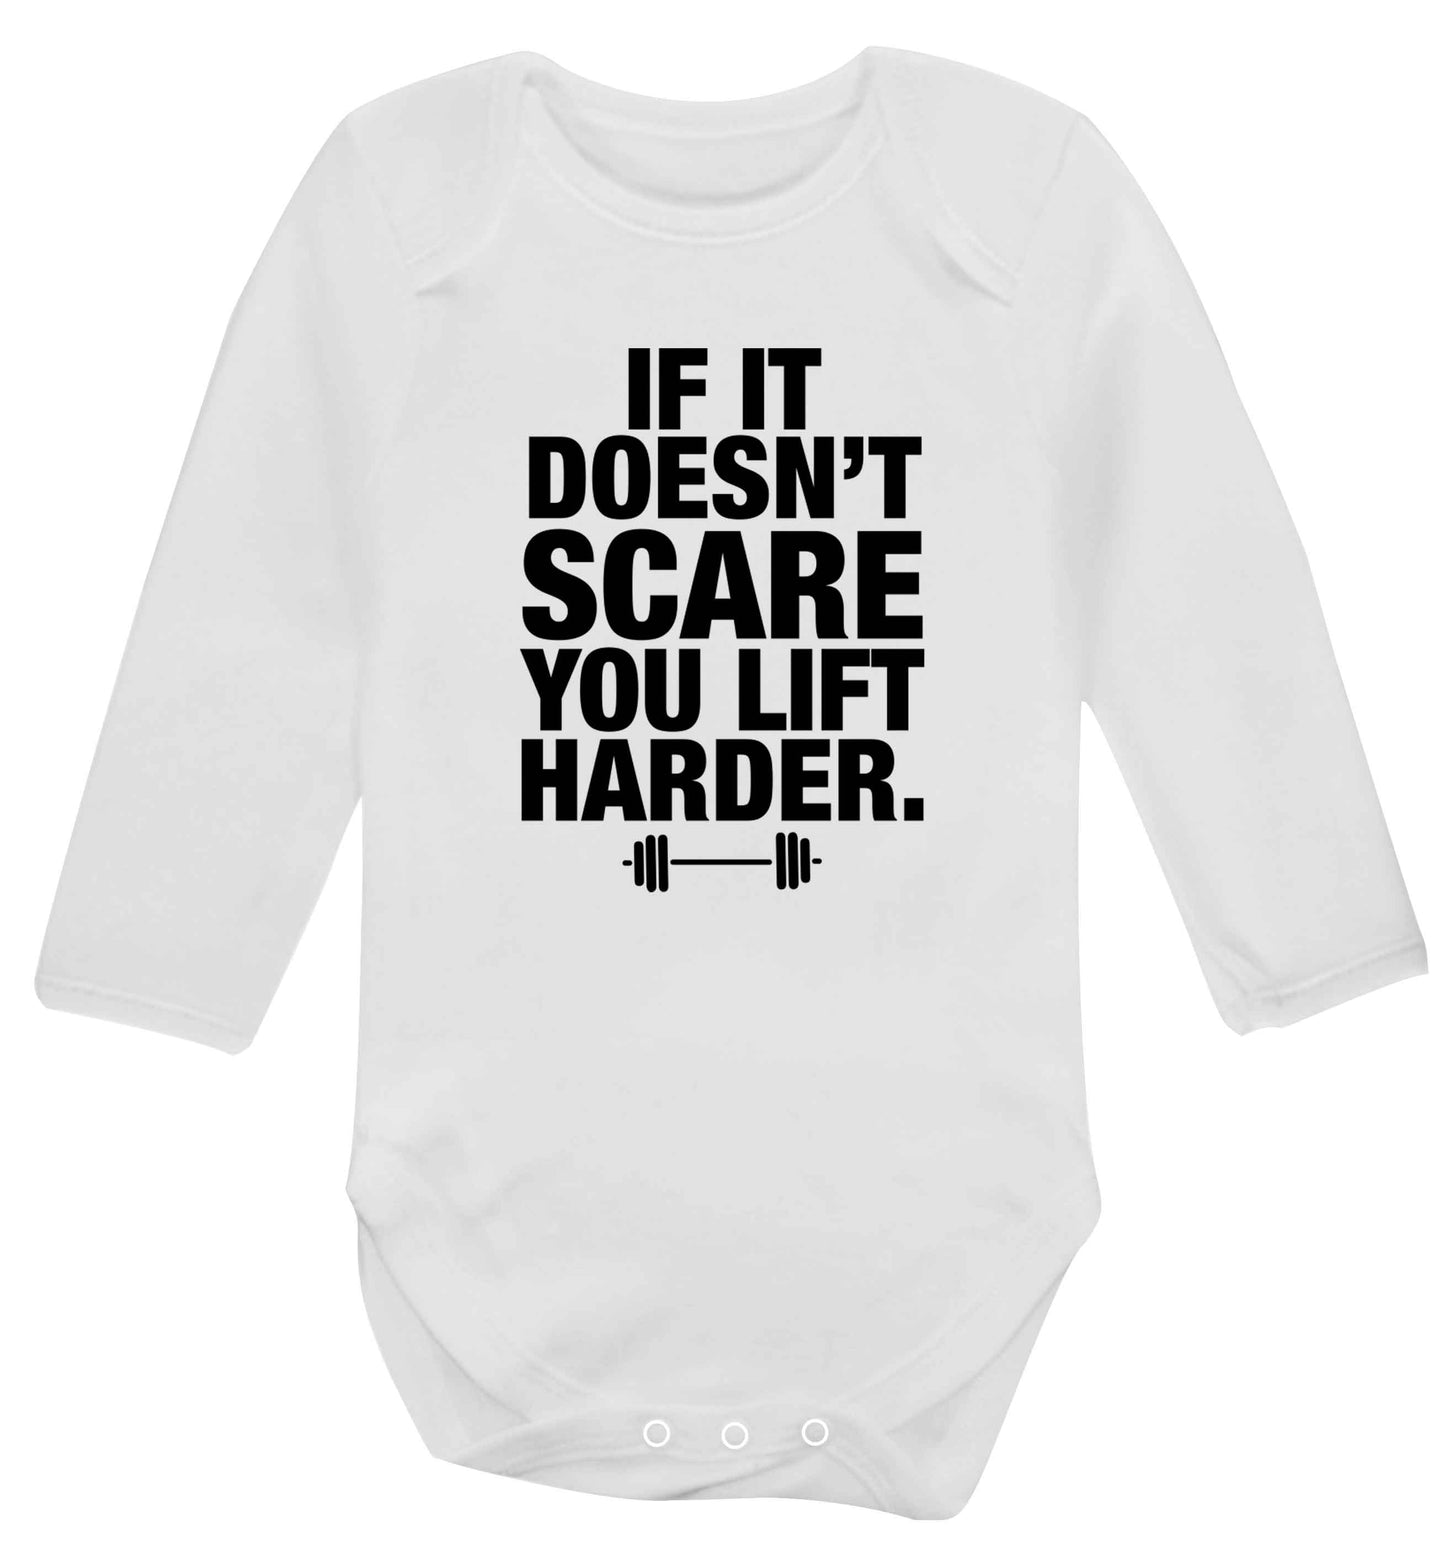 If it doesnt' scare you lift harder Baby Vest long sleeved white 6-12 months